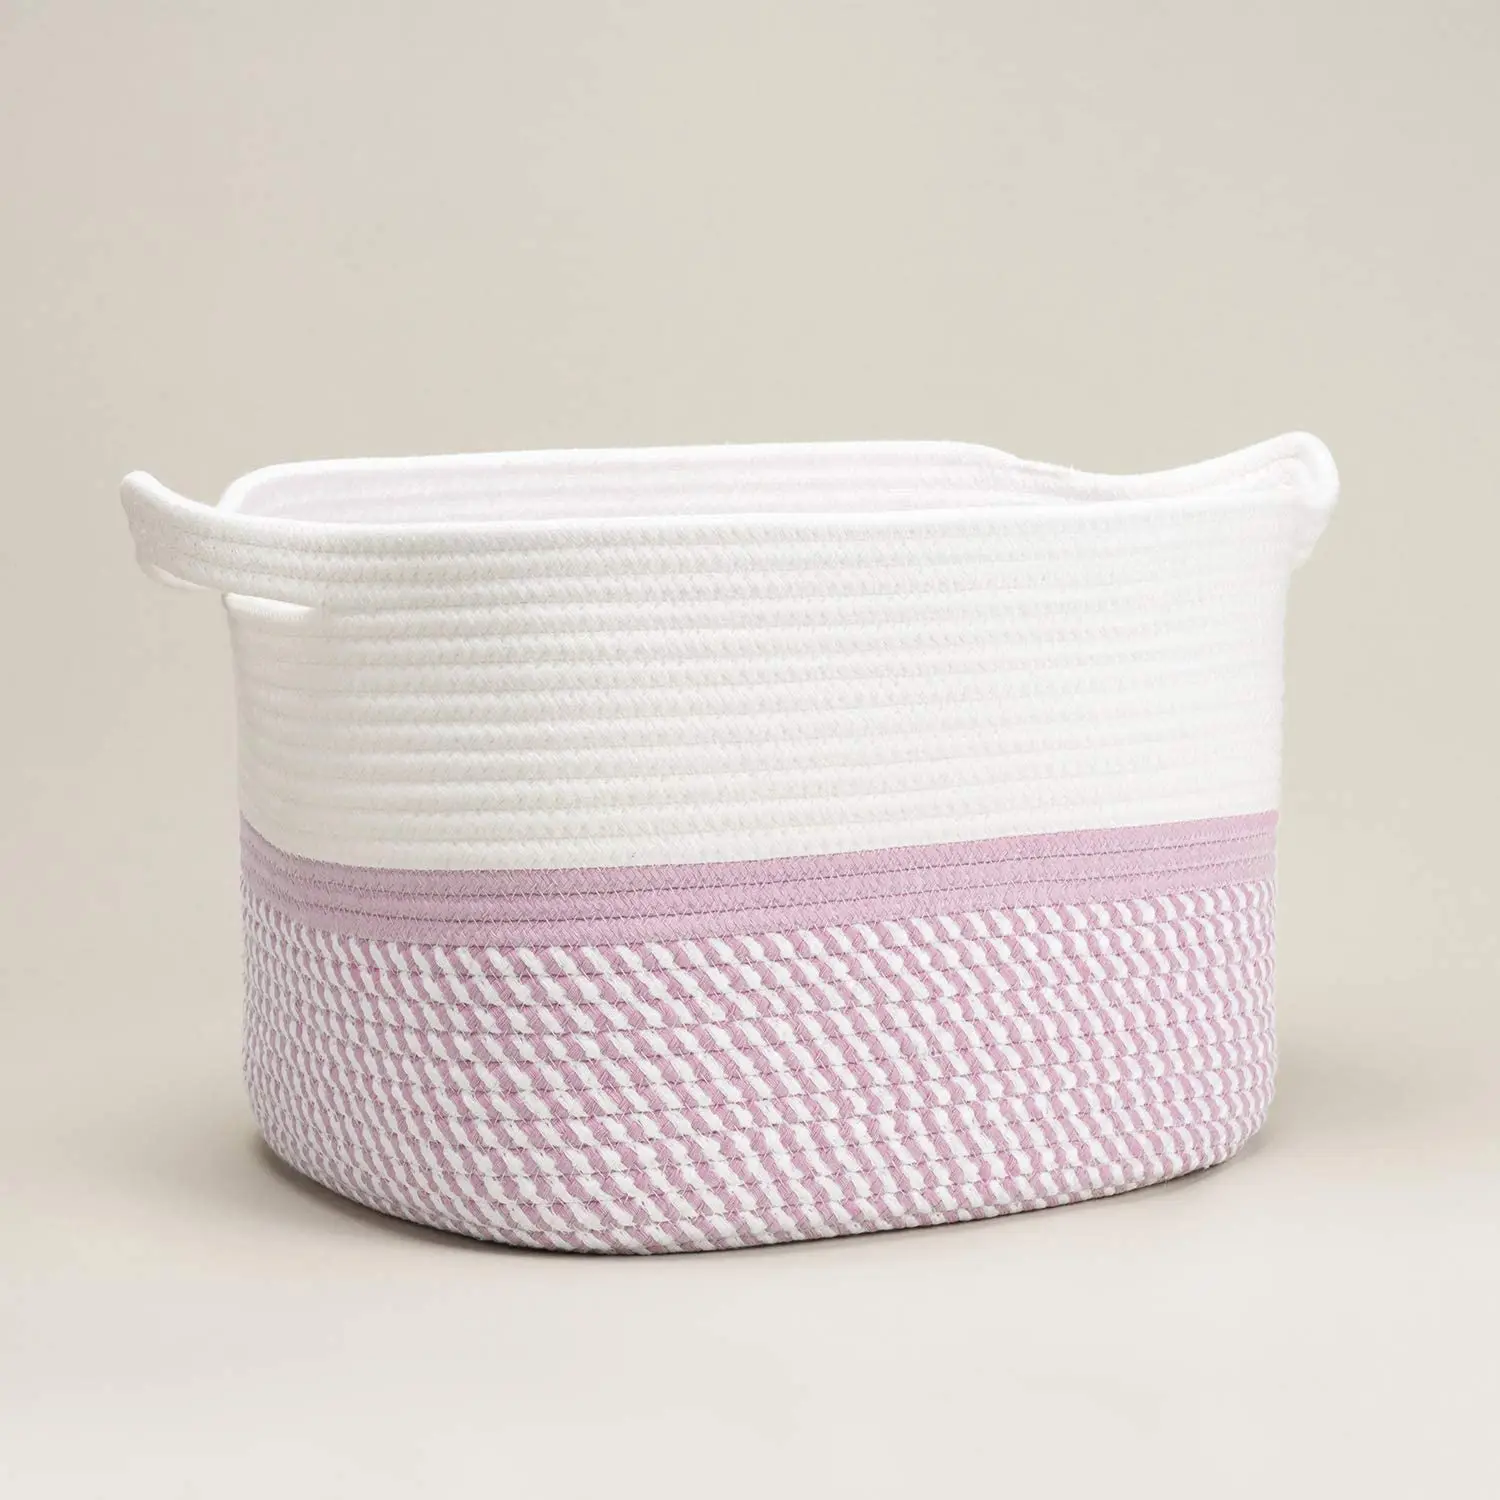 

Cotton Rope Baskets Woven Basket Rectangular Storage Basket with rope Handles for Organizing Magazines Kids Toys Clothes Blanket